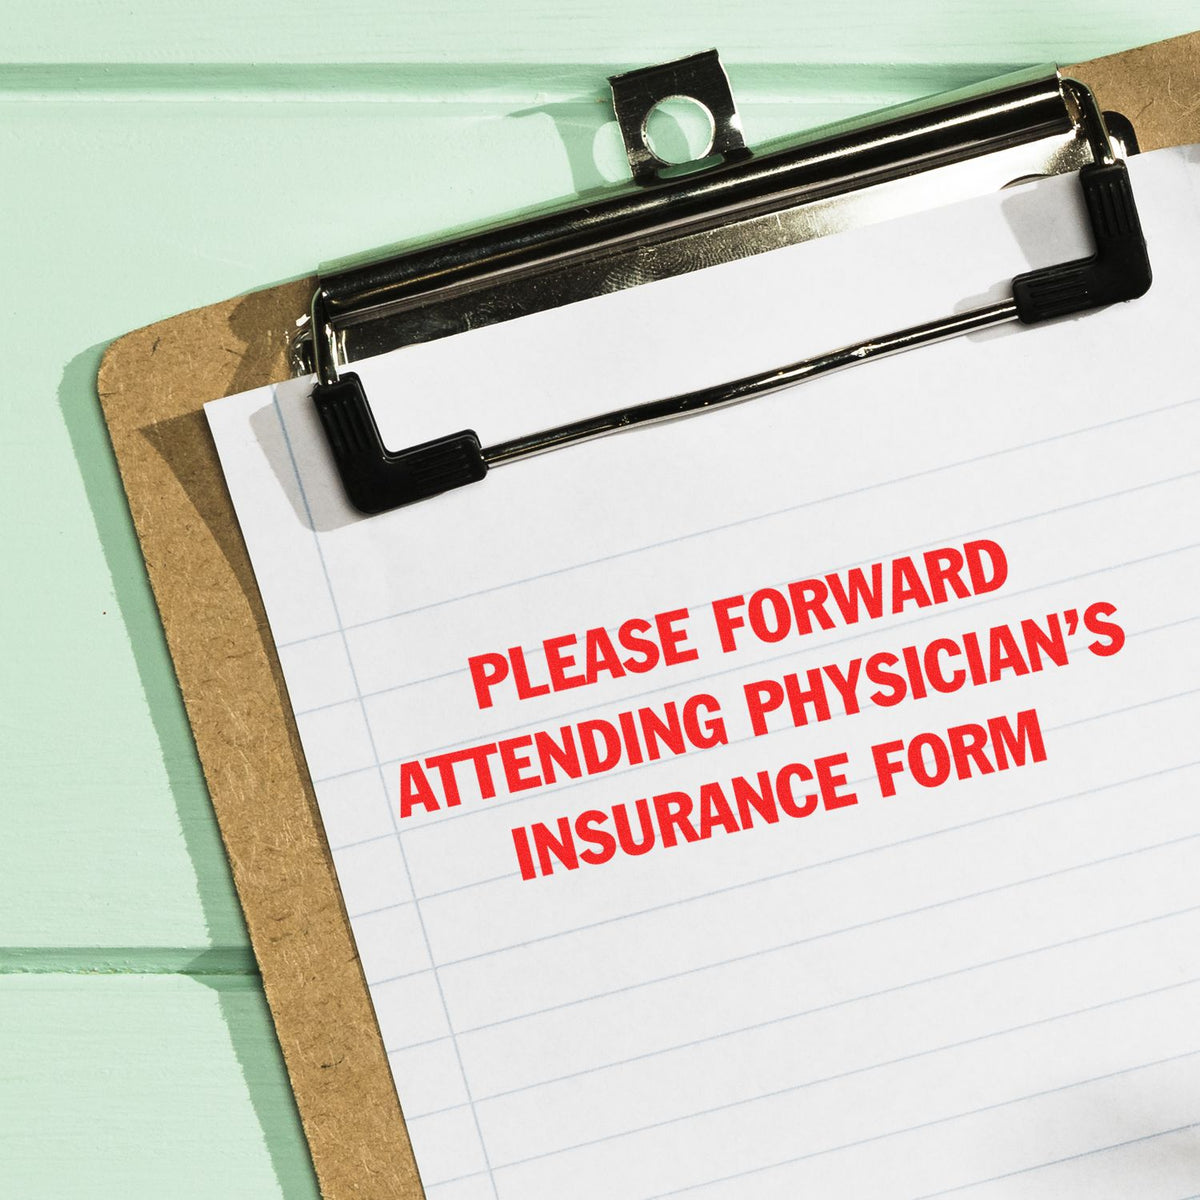 Please Forward Insurance Form Rubber Stamp In Use Photo